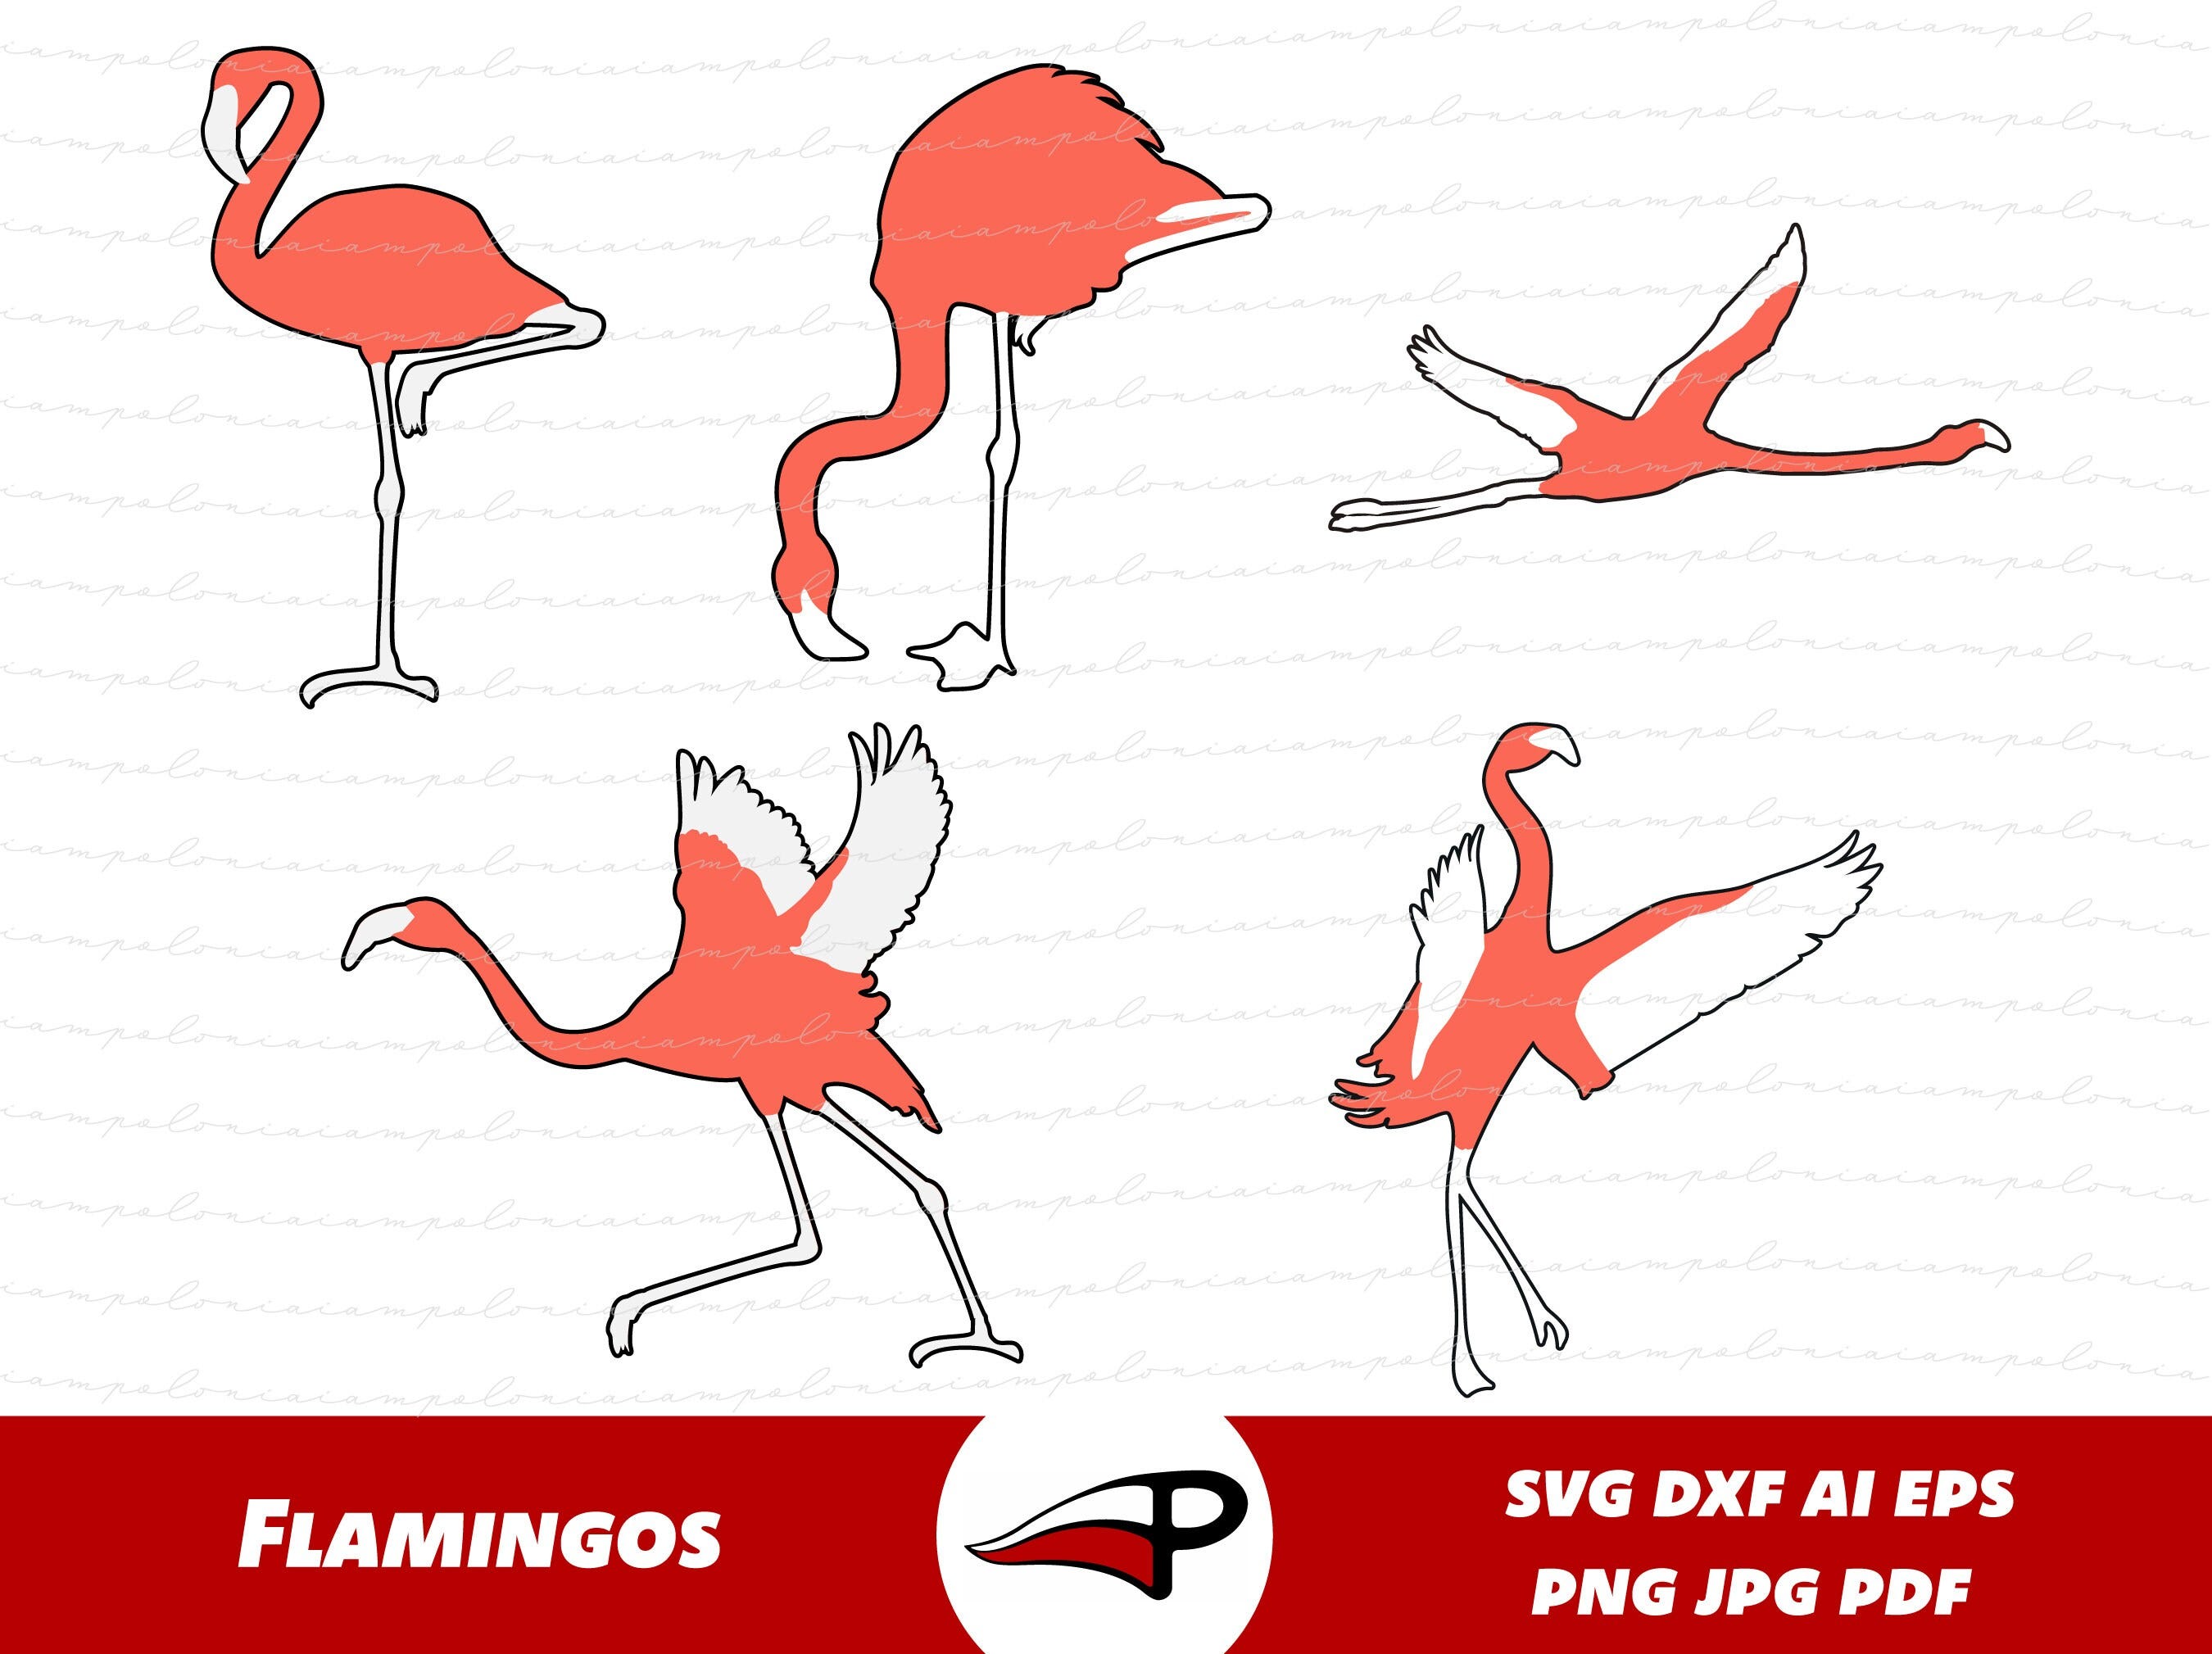 Flamingo Layered SVG Bundle, Real Flamingo Clipart, Flamingo Silhouette, Flying Flamingo Png for Cricut and Glowforge